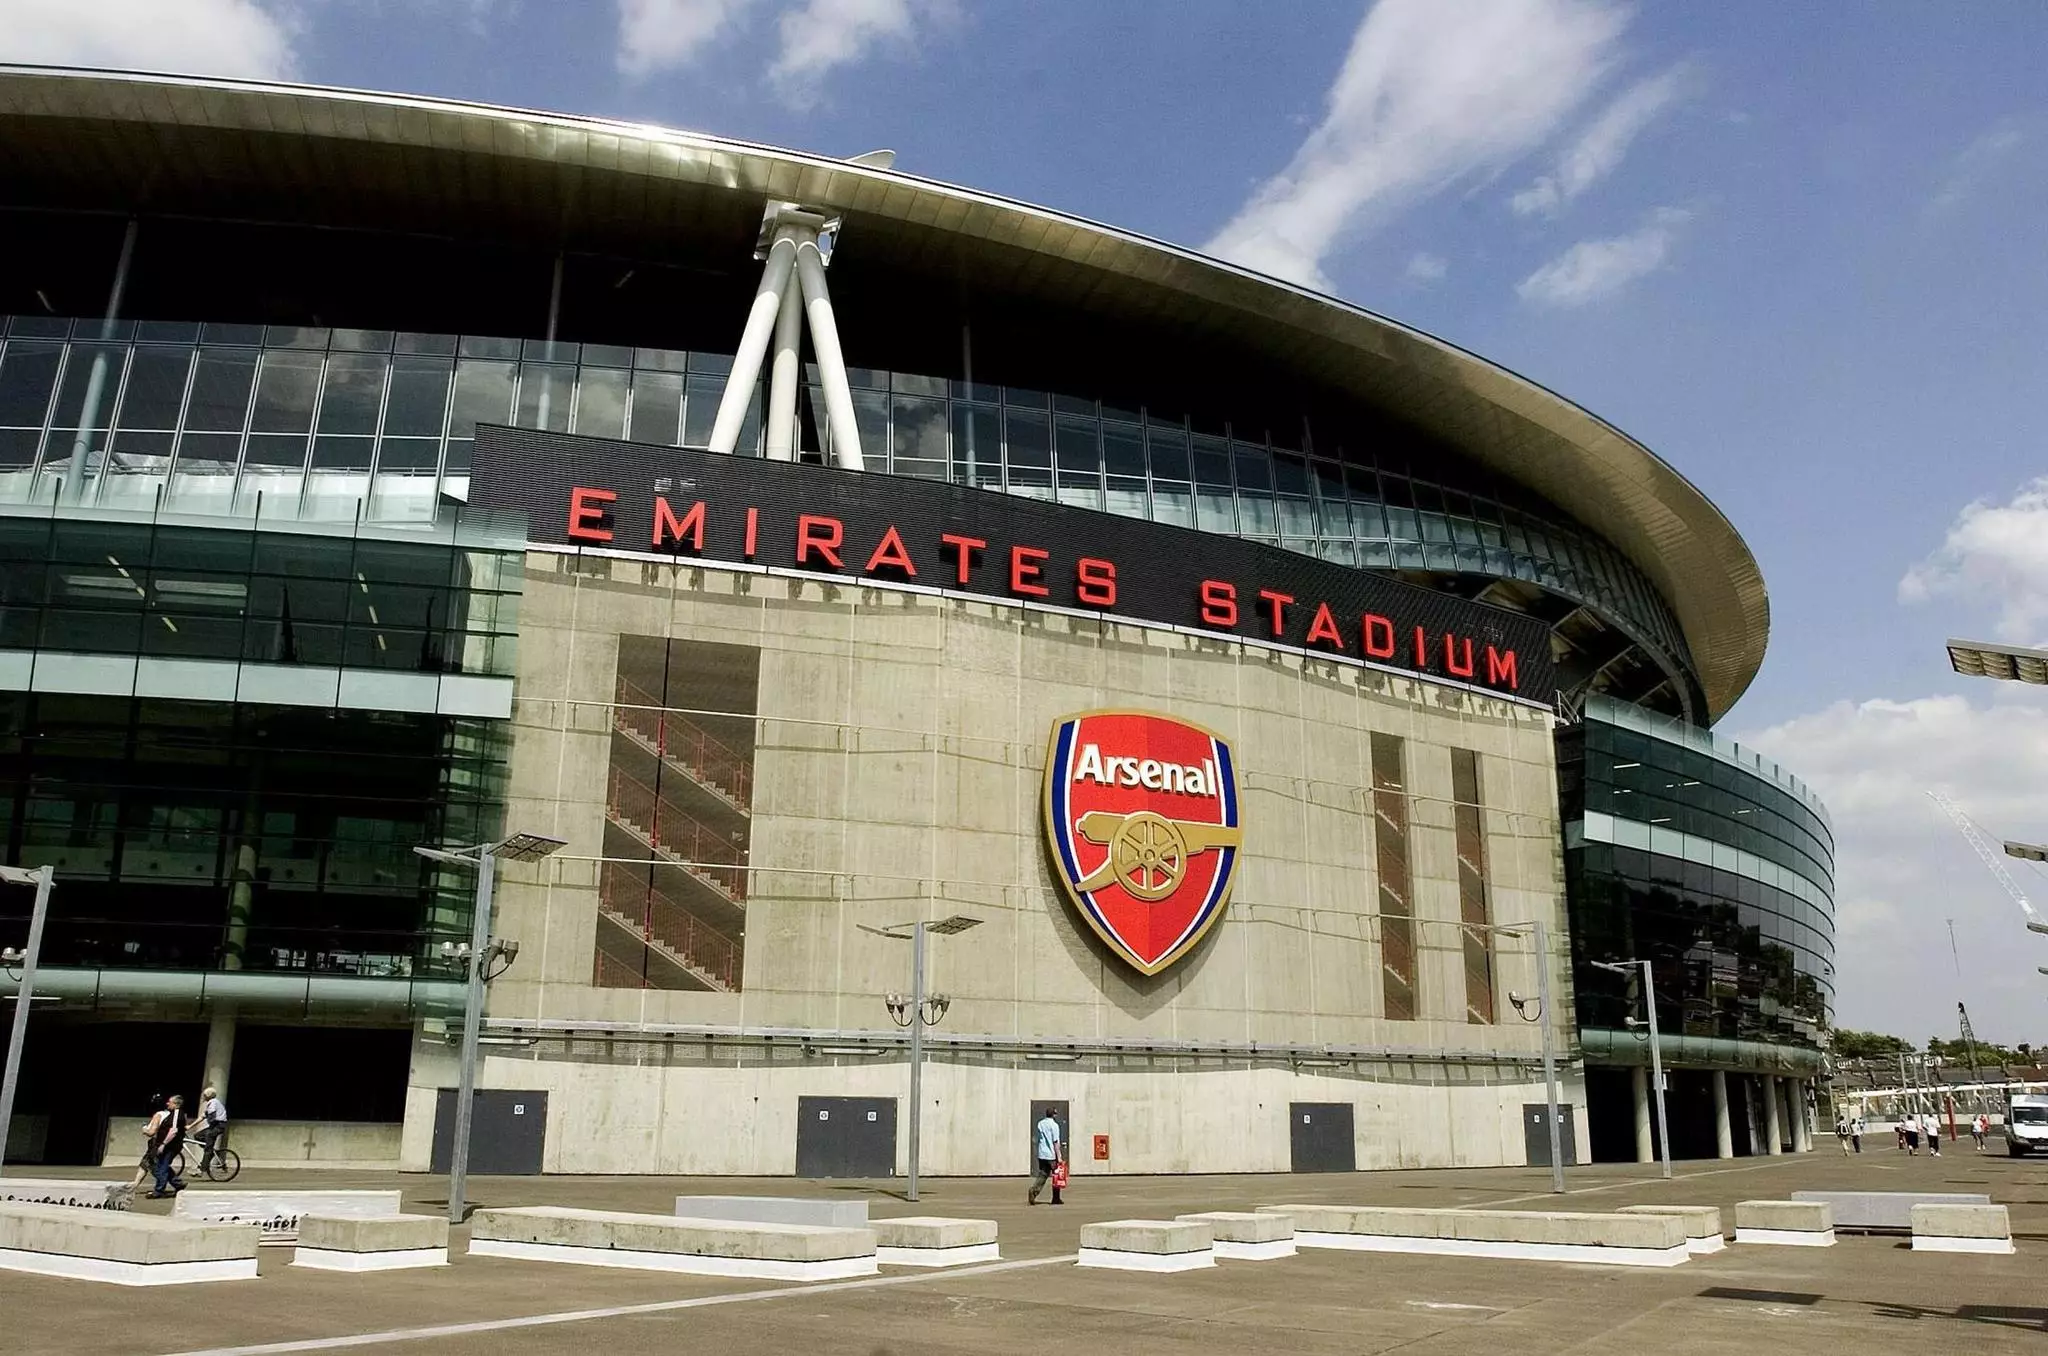 The Emirates Stadium, before the mice moved in. Image: PA Images